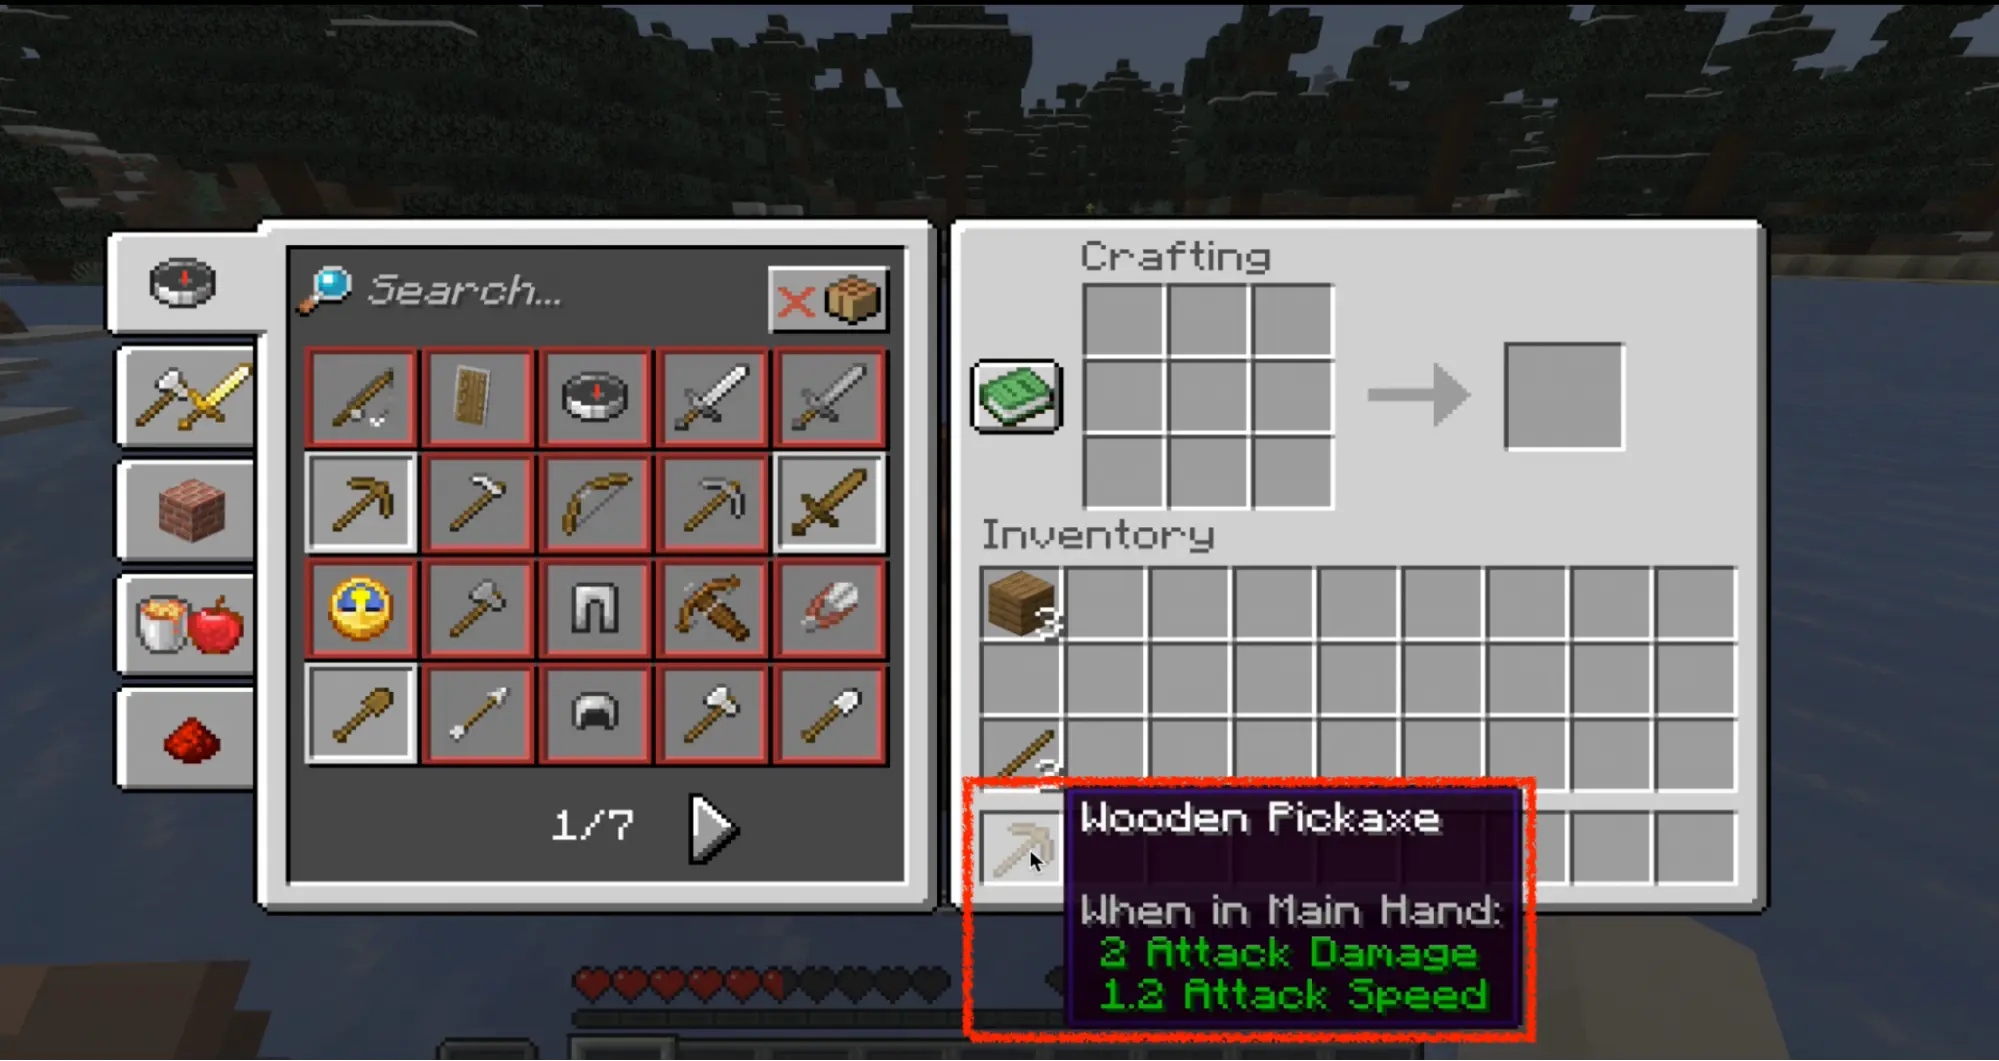 craft the wooden pickaxe